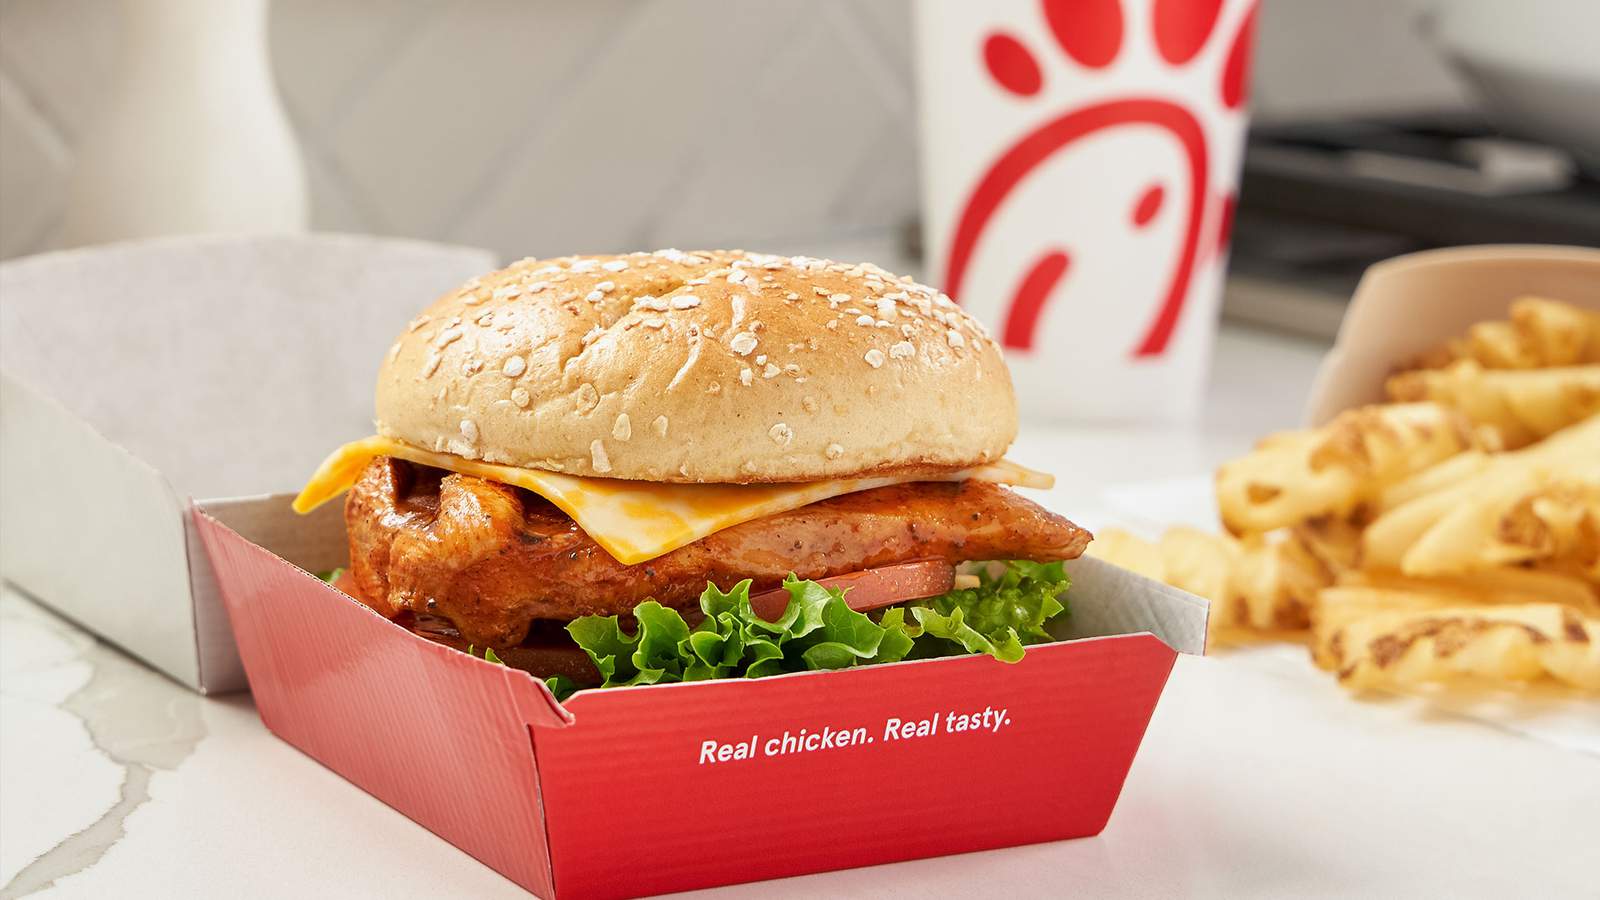 Chick-fil-A adds spicy grilled chicken sandwich to menu for limited time